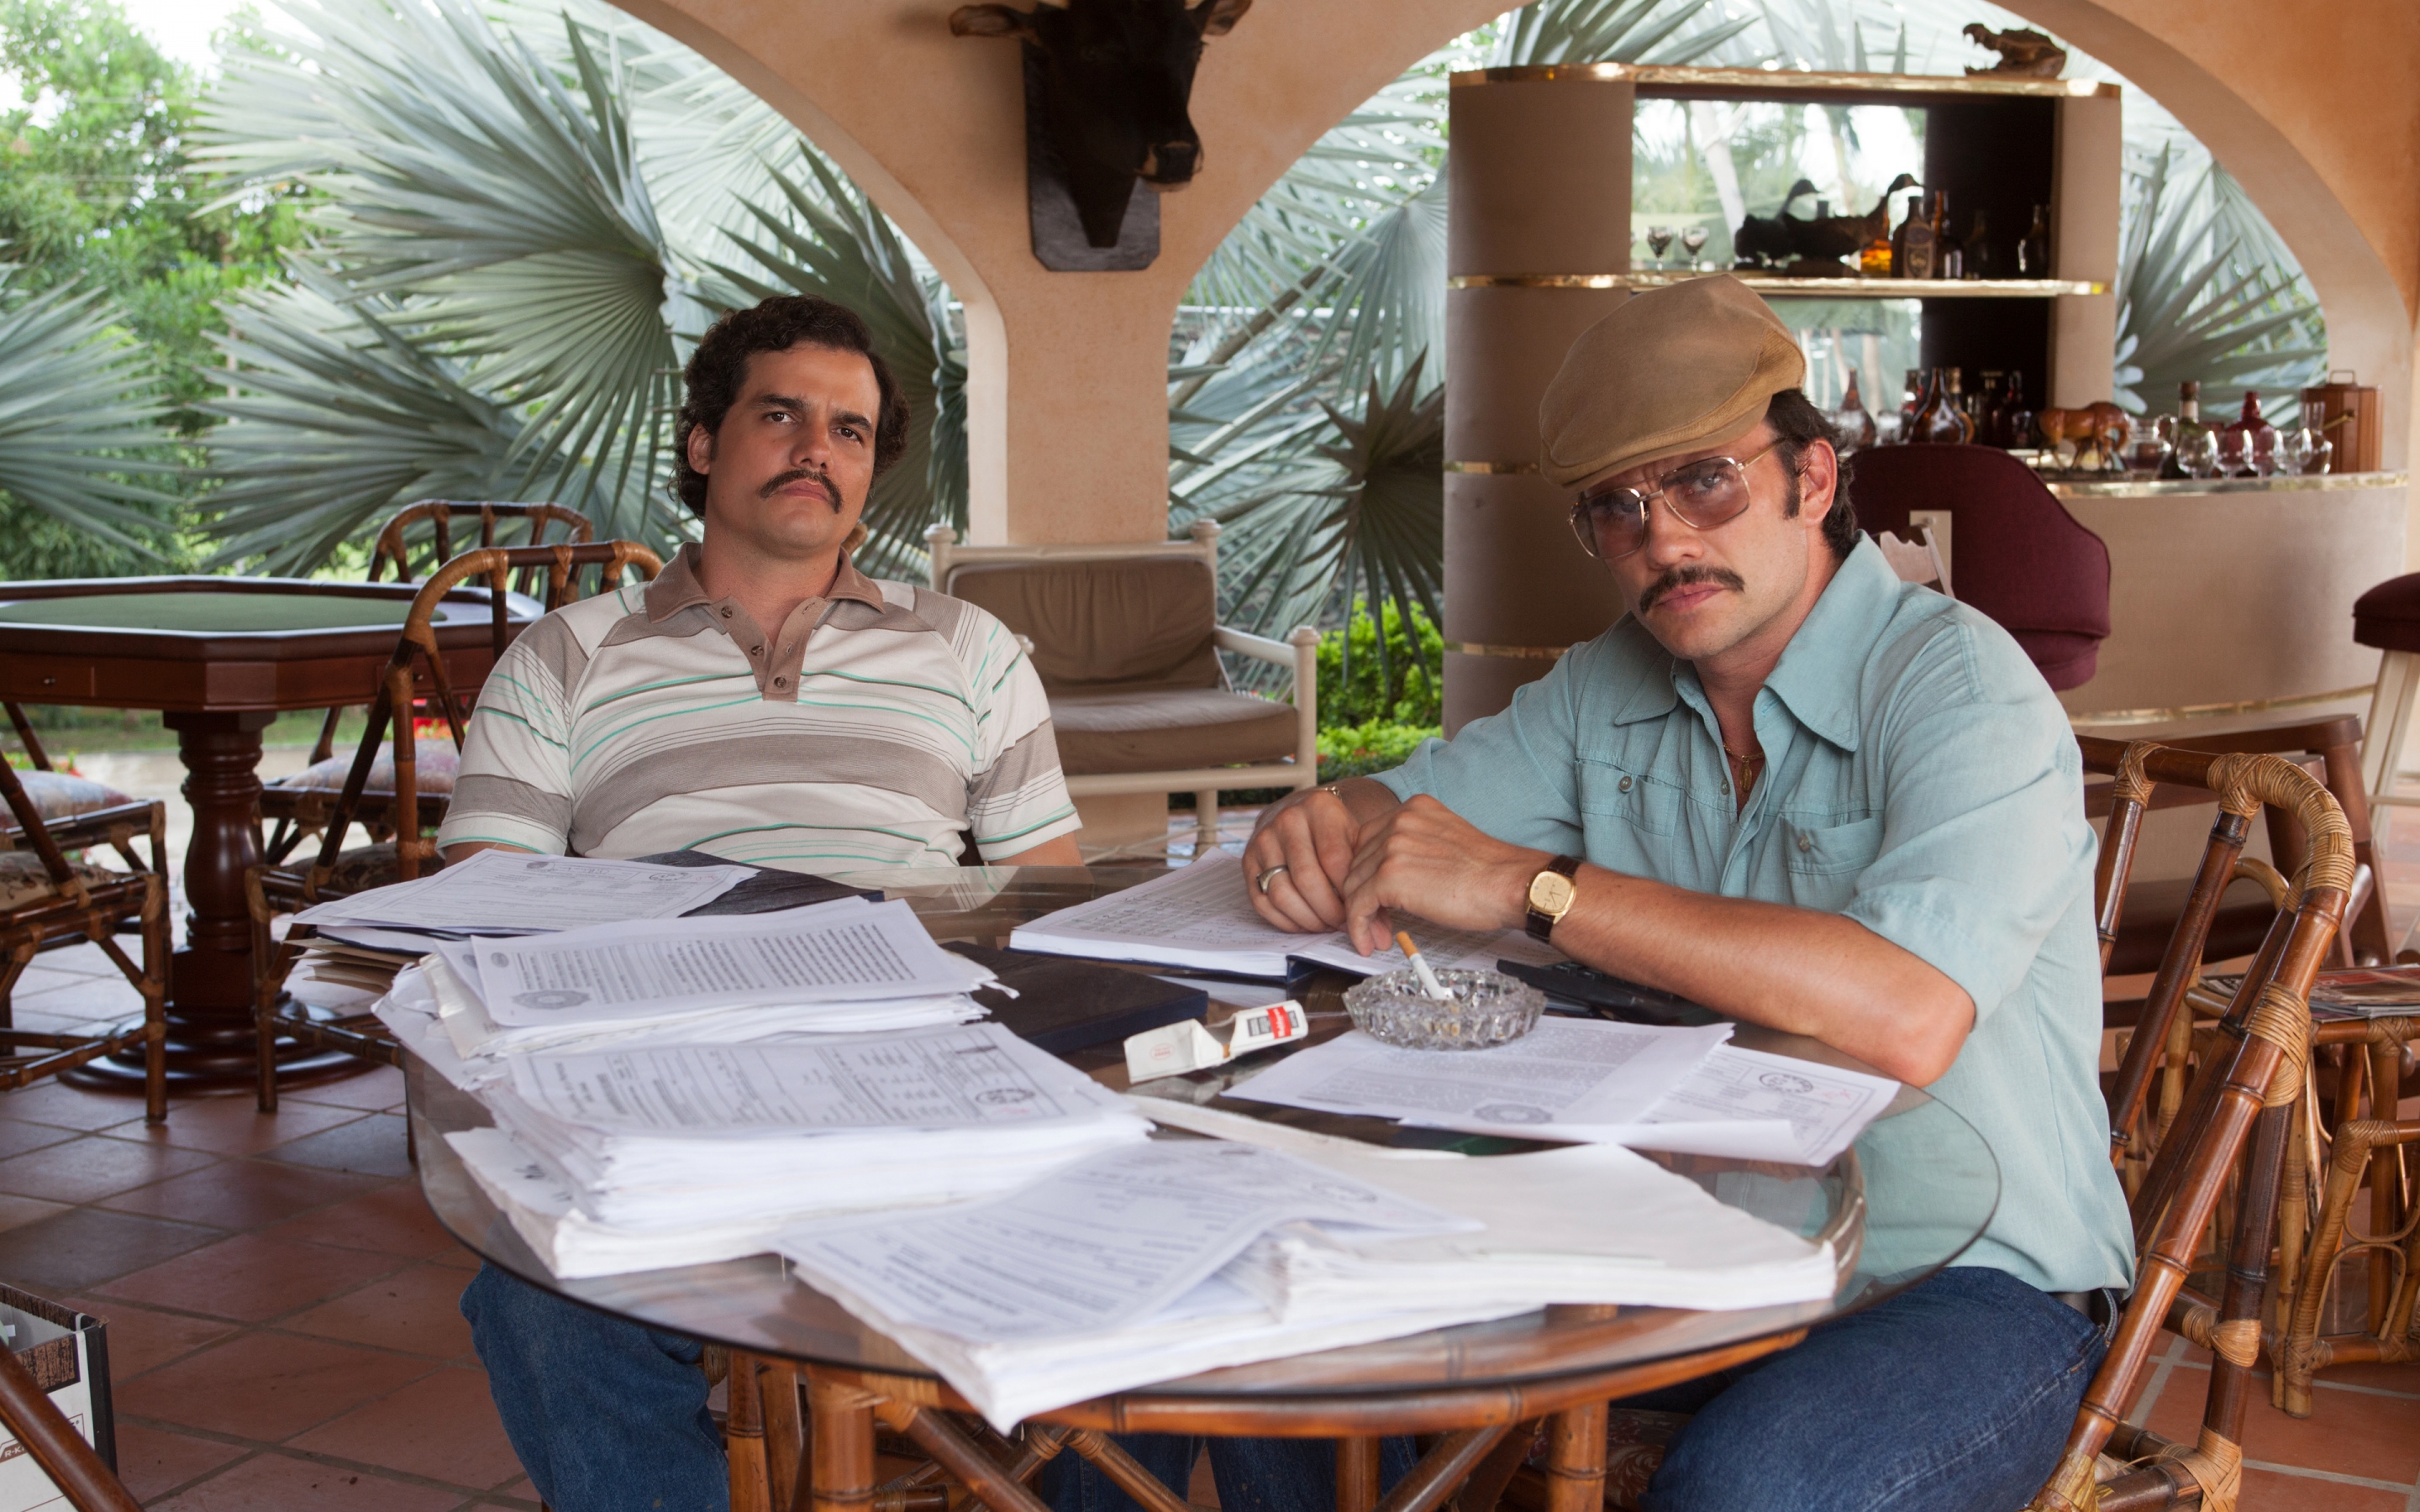 Pablo and Gustavo Narcos for 2880 x 1800 Retina Display resolution